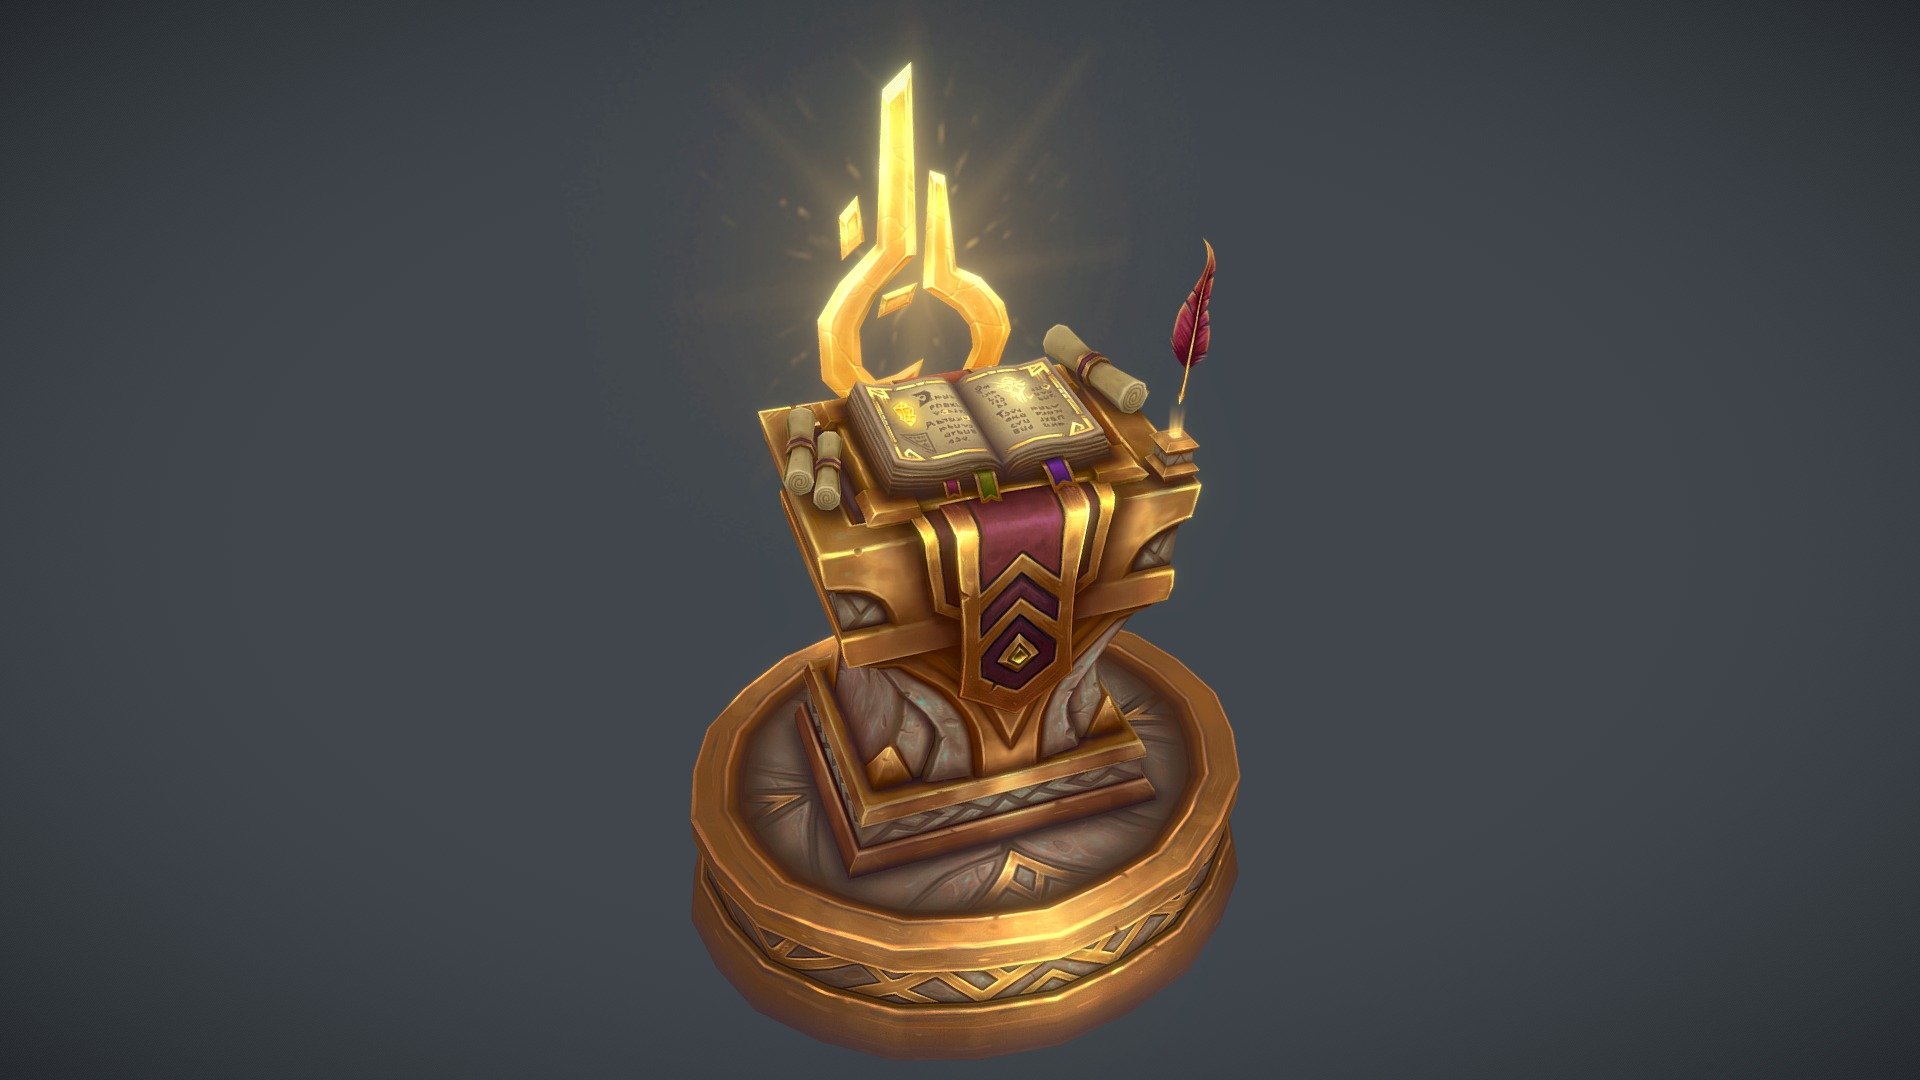 This is a fanart inspired in world of warcraft, the goal was to make a Pedestal with some props in the Lightforged Draenei style! Hope you like it ! more shots on artstation:
https://www.artstation.com/artwork/rRne4J - Lightforged Draenei Pedestal - 3D model by BrunoParrela 3d model